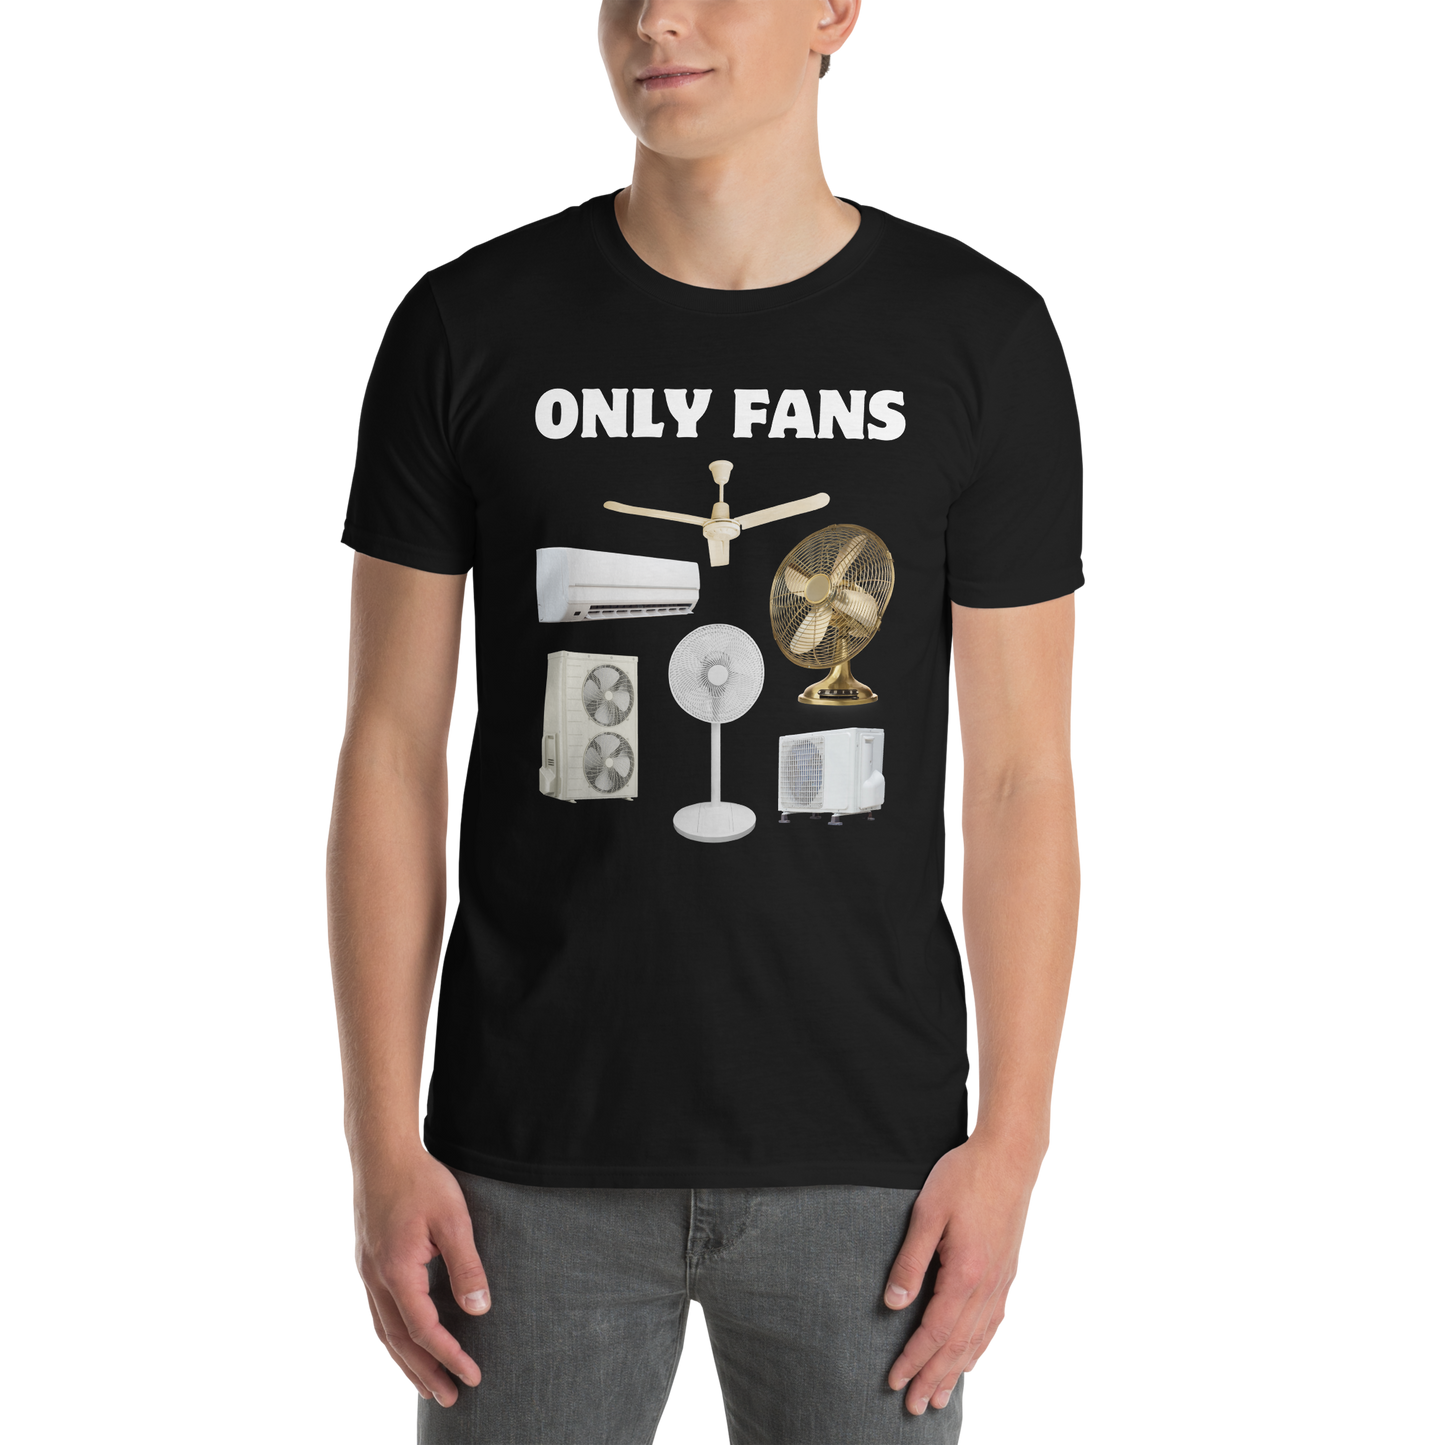 Man wearing a Black Only Fans T-Shirt featuring a fun Only Fans graphic on the chest - Best Graphic T-Shirts - Boozy Fox